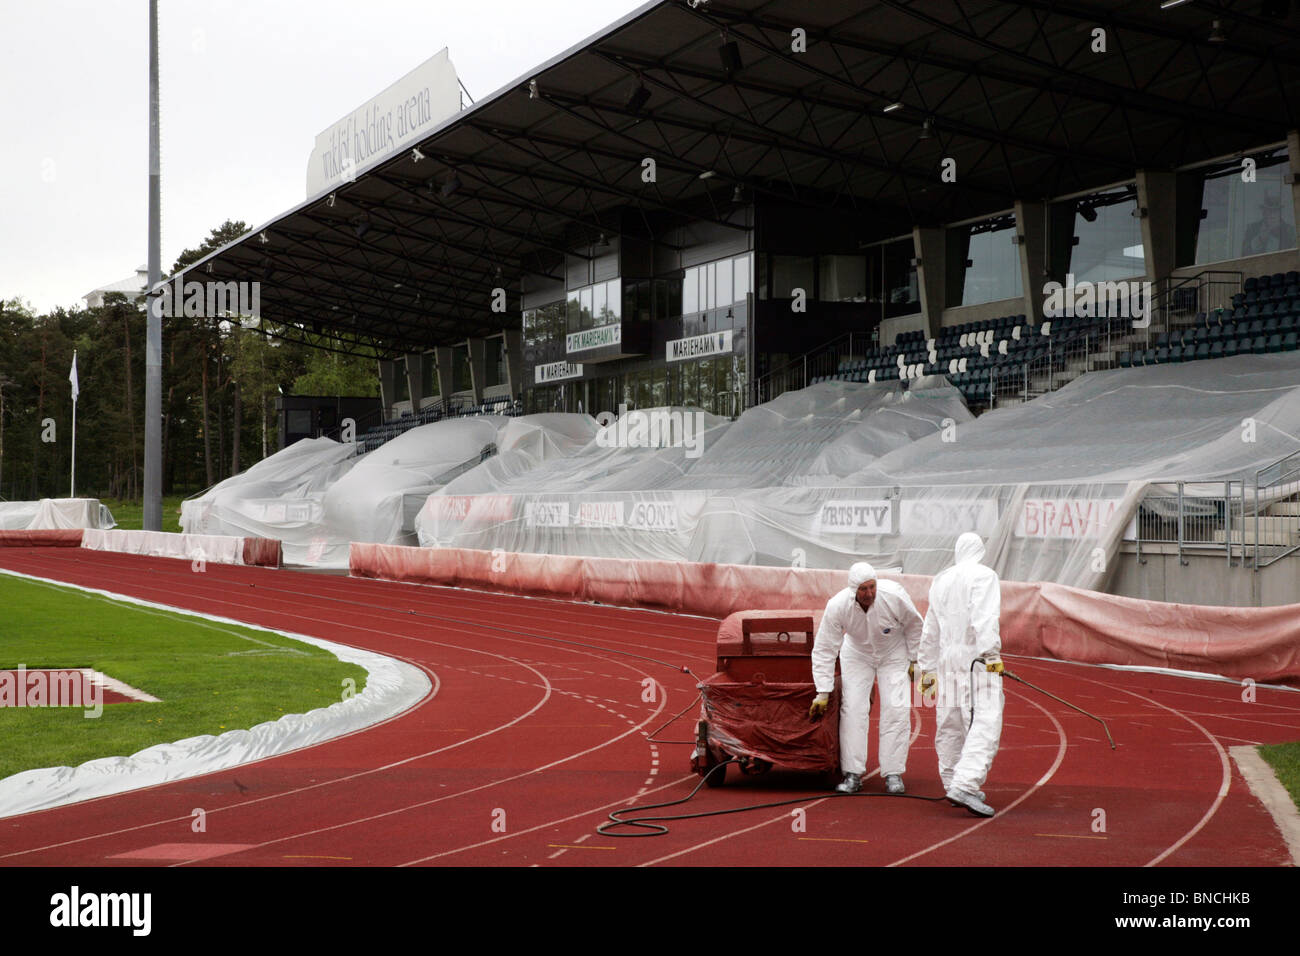 Preparations for Island Games the running track is washed at Wiklöf Holding Arena in Mariehman, May 27 2009 Stock Photo